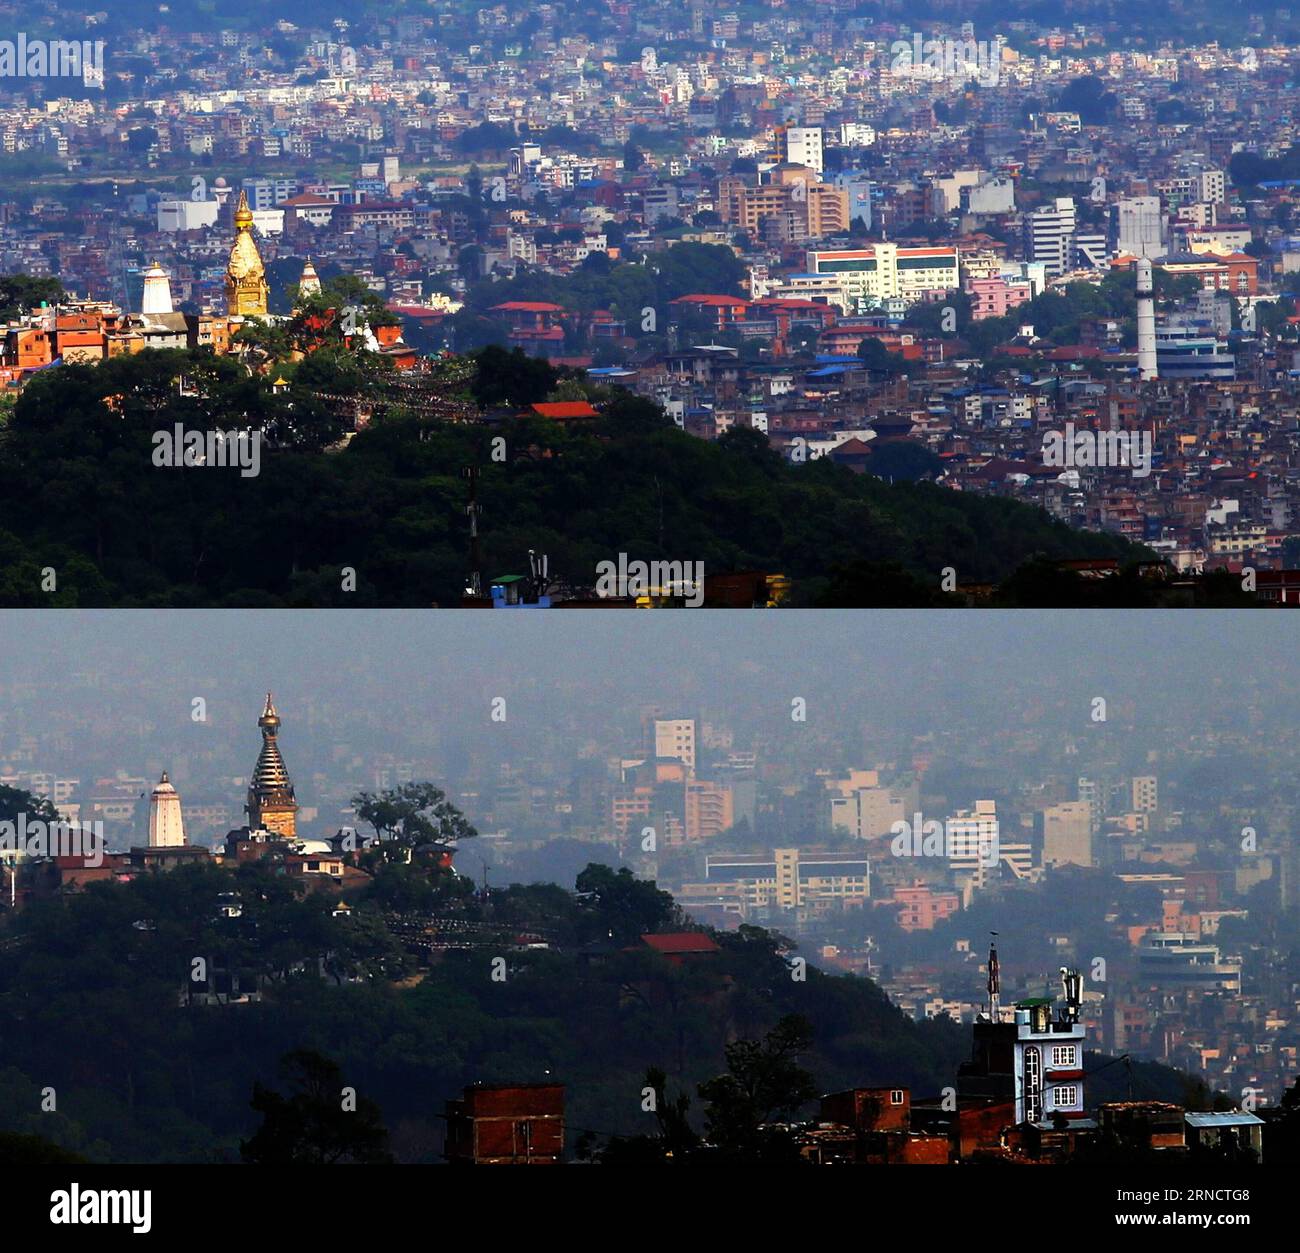 KATHMANDU, April 20, 2016 -- Combined photo taken on July 19, 2014 (top) shows the view of Kathmandu valley with Swayambhunath Stupa (L), or monkey temple, and historical Bhimsen tower (R), Dharahara, from a hill in Kathmandu and the valley view (bottom) with Swayambhunath stupa which was badly damaged by the earthquake last year from a hill in Kathmandu, Nepal, April 20, 2016. Reconstruction process is undergoing in Swayambhunath stupa as it was badly damaged in the earthquake last year. ) NEPAL-KATHMANDU-SWAYAMBHUNATH STUPA SunilxSharma PUBLICATIONxNOTxINxCHN   Kathmandu April 20 2016 Combin Stock Photo